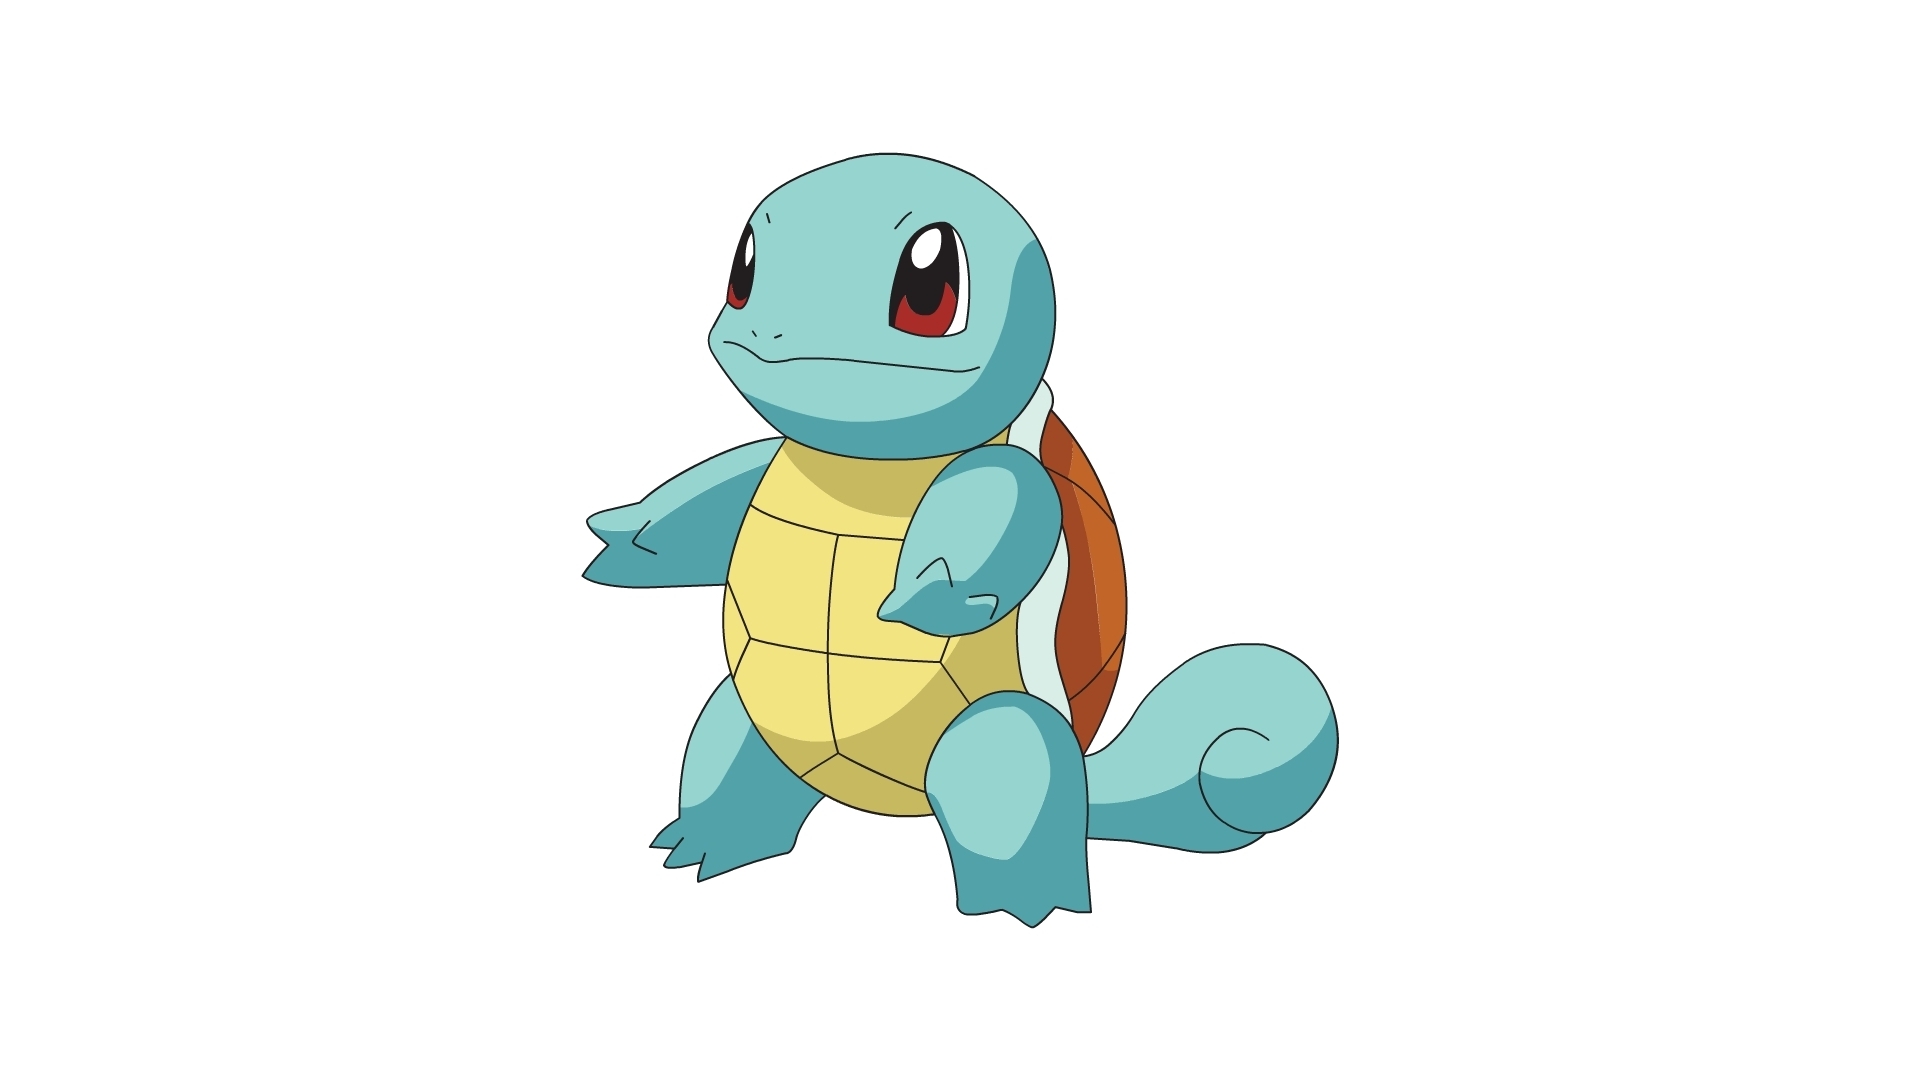 Free download Download Wallpaper Download 2560x1440 pokemon squirtle [2560x1440] for your Desktop, Mobile & Tablet. Explore Squirtle HD Wallpaper. Squirtle HD Wallpaper, Squirtle Wallpaper, Derpy Squirtle Wallpaper